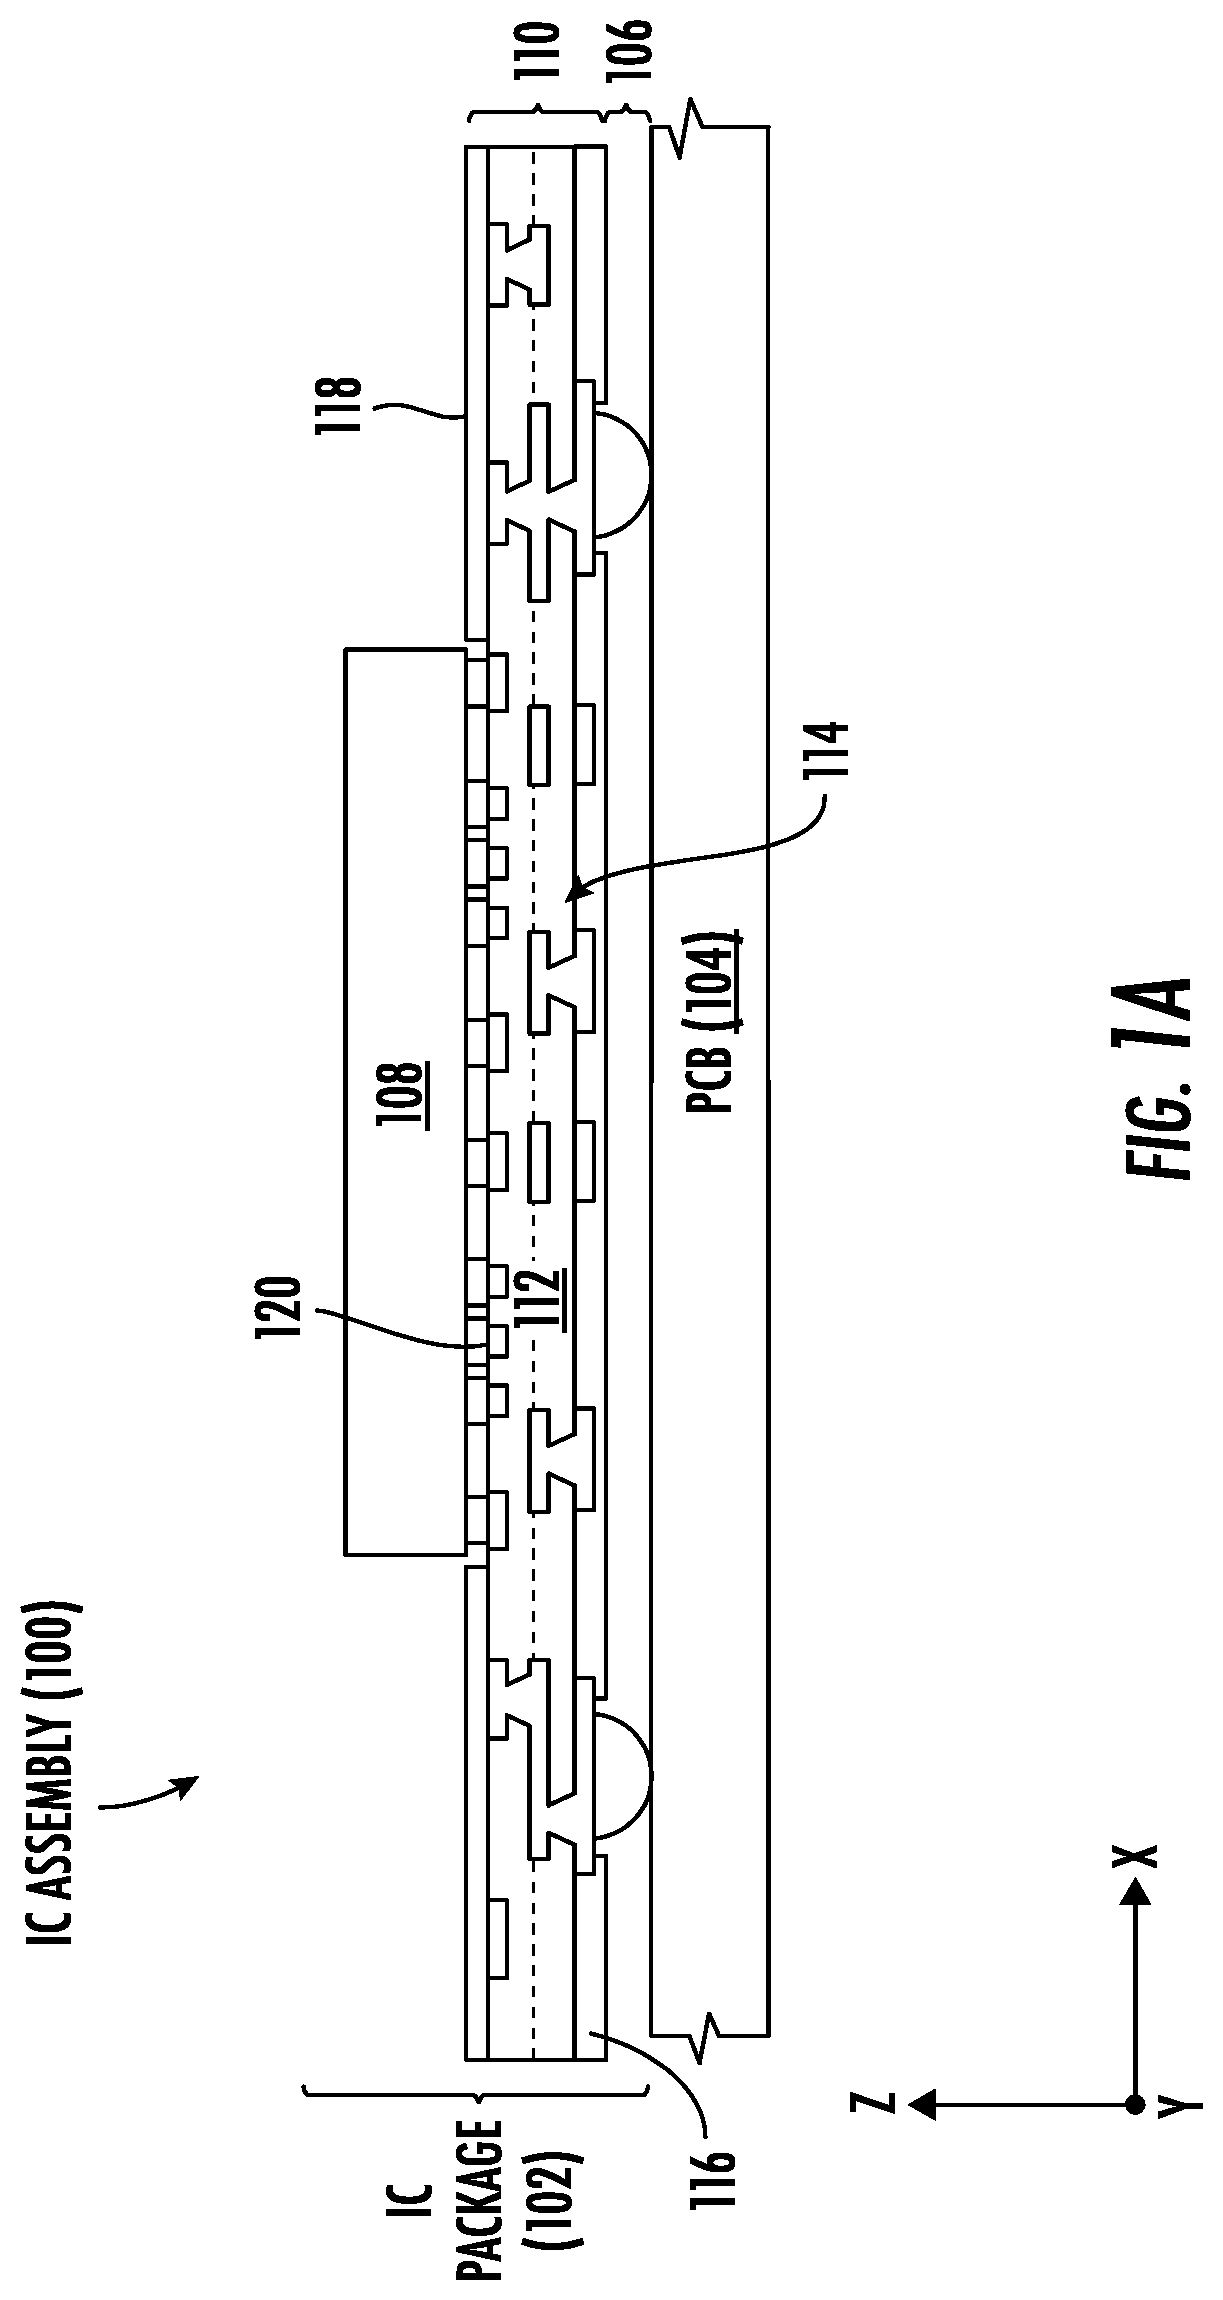 Integrated circuit (IC) package substrate with embedded trace substrate (ETS) layer on a substrate, and related fabrication methods